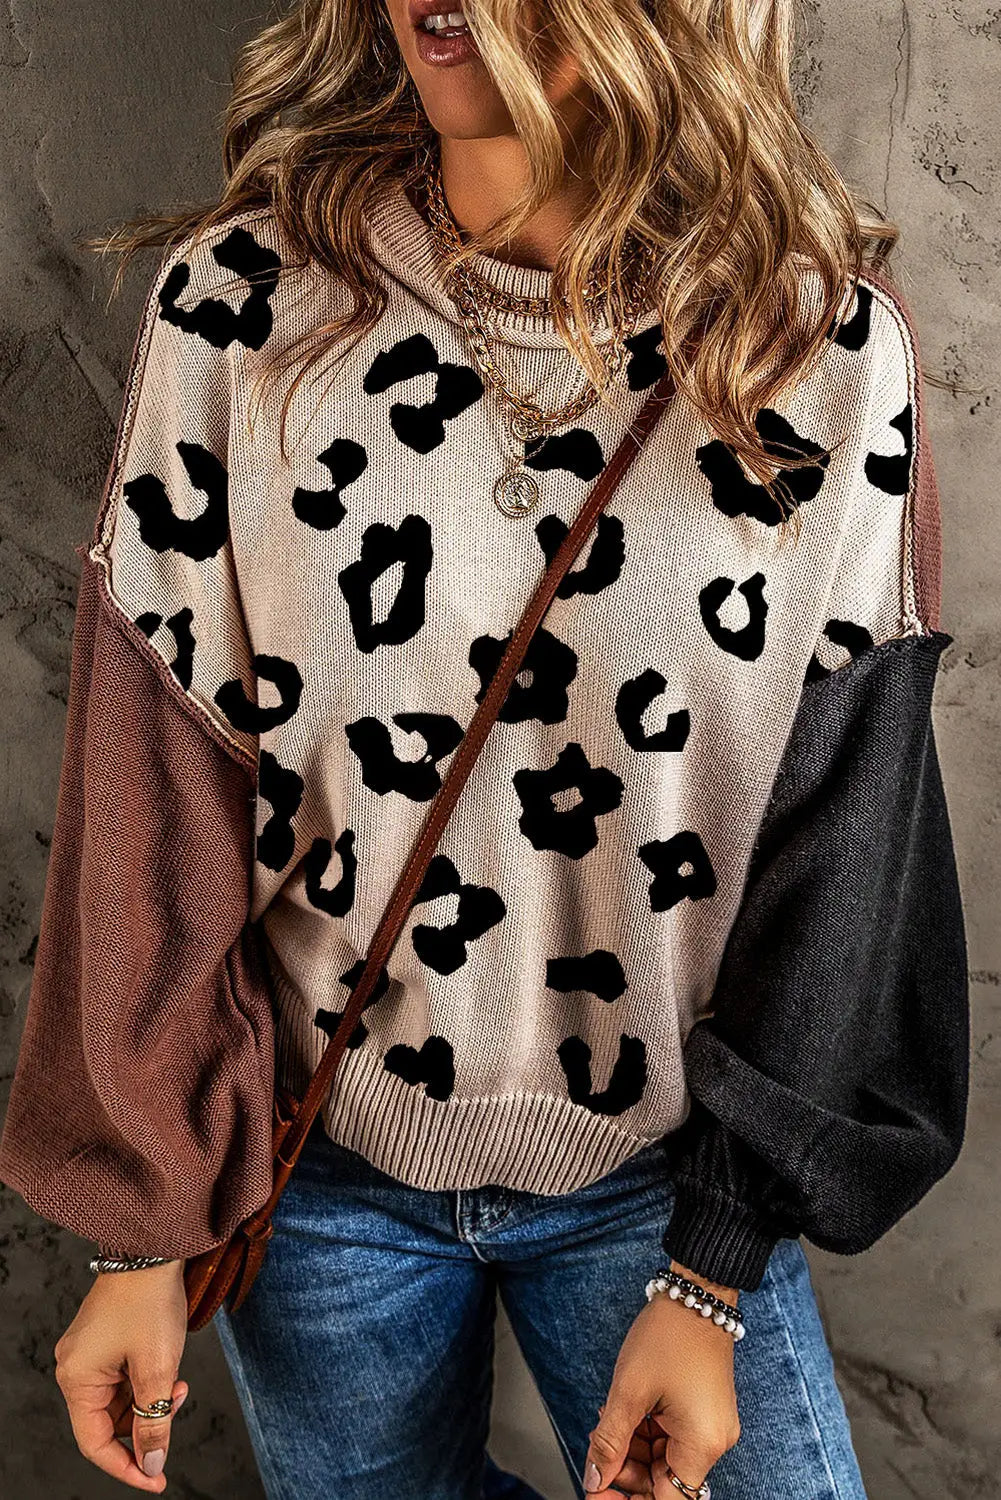 Coffee leopard print colorblock pullover sweater - s / 55% acrylic + 45% cotton - tops